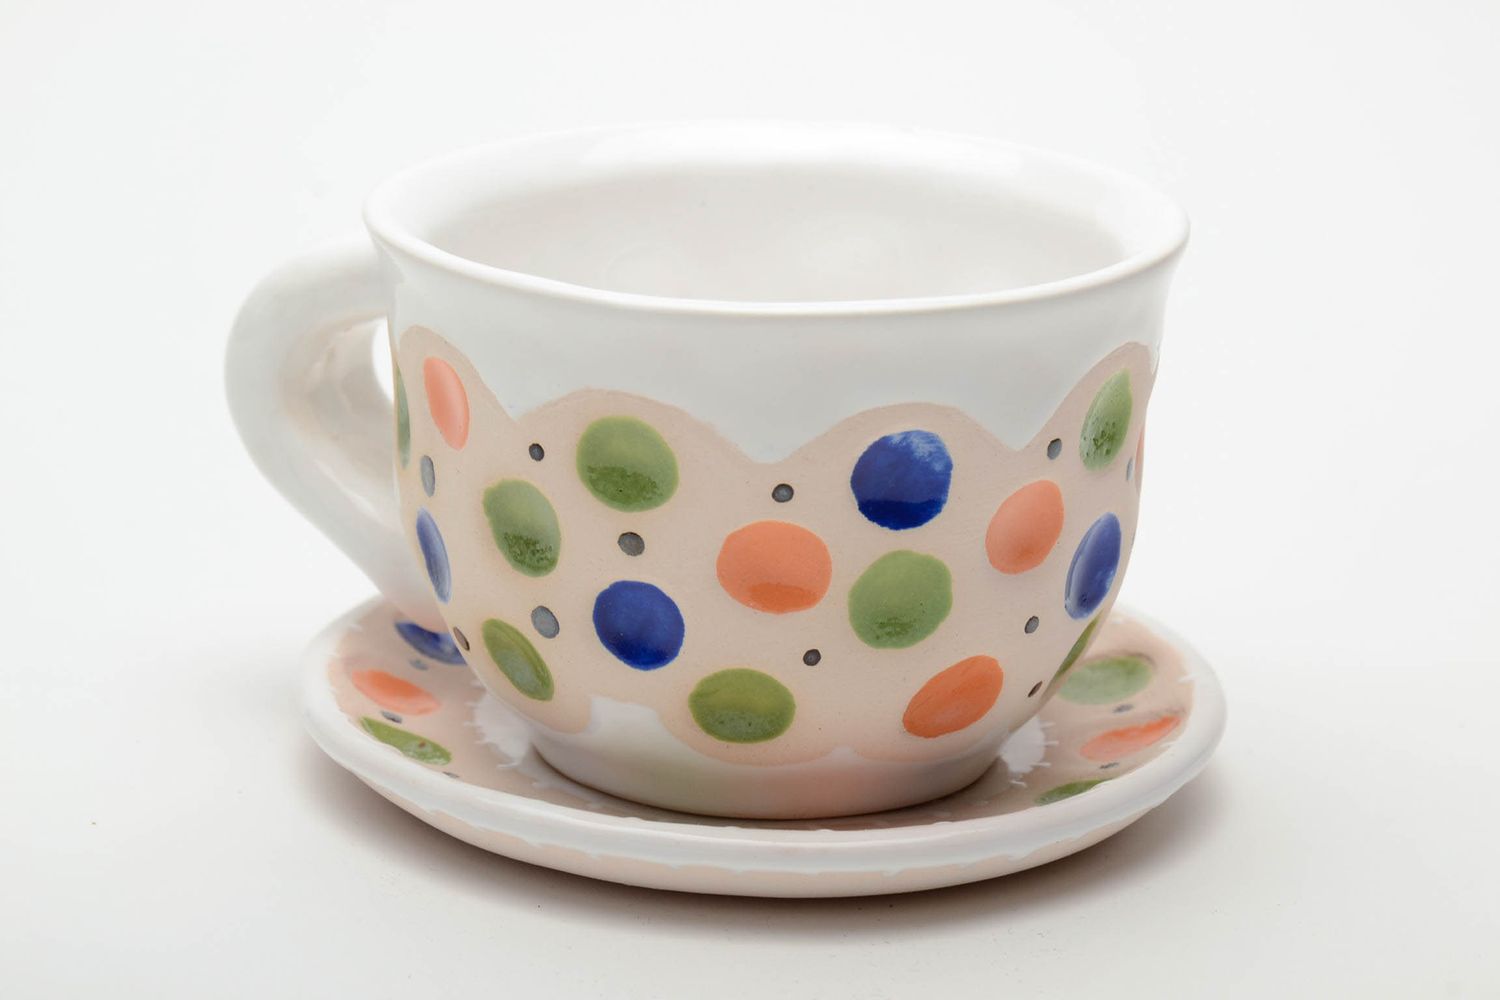  Tea ceramic cup and saucer with handmade pattern 0,63 lb photo 2